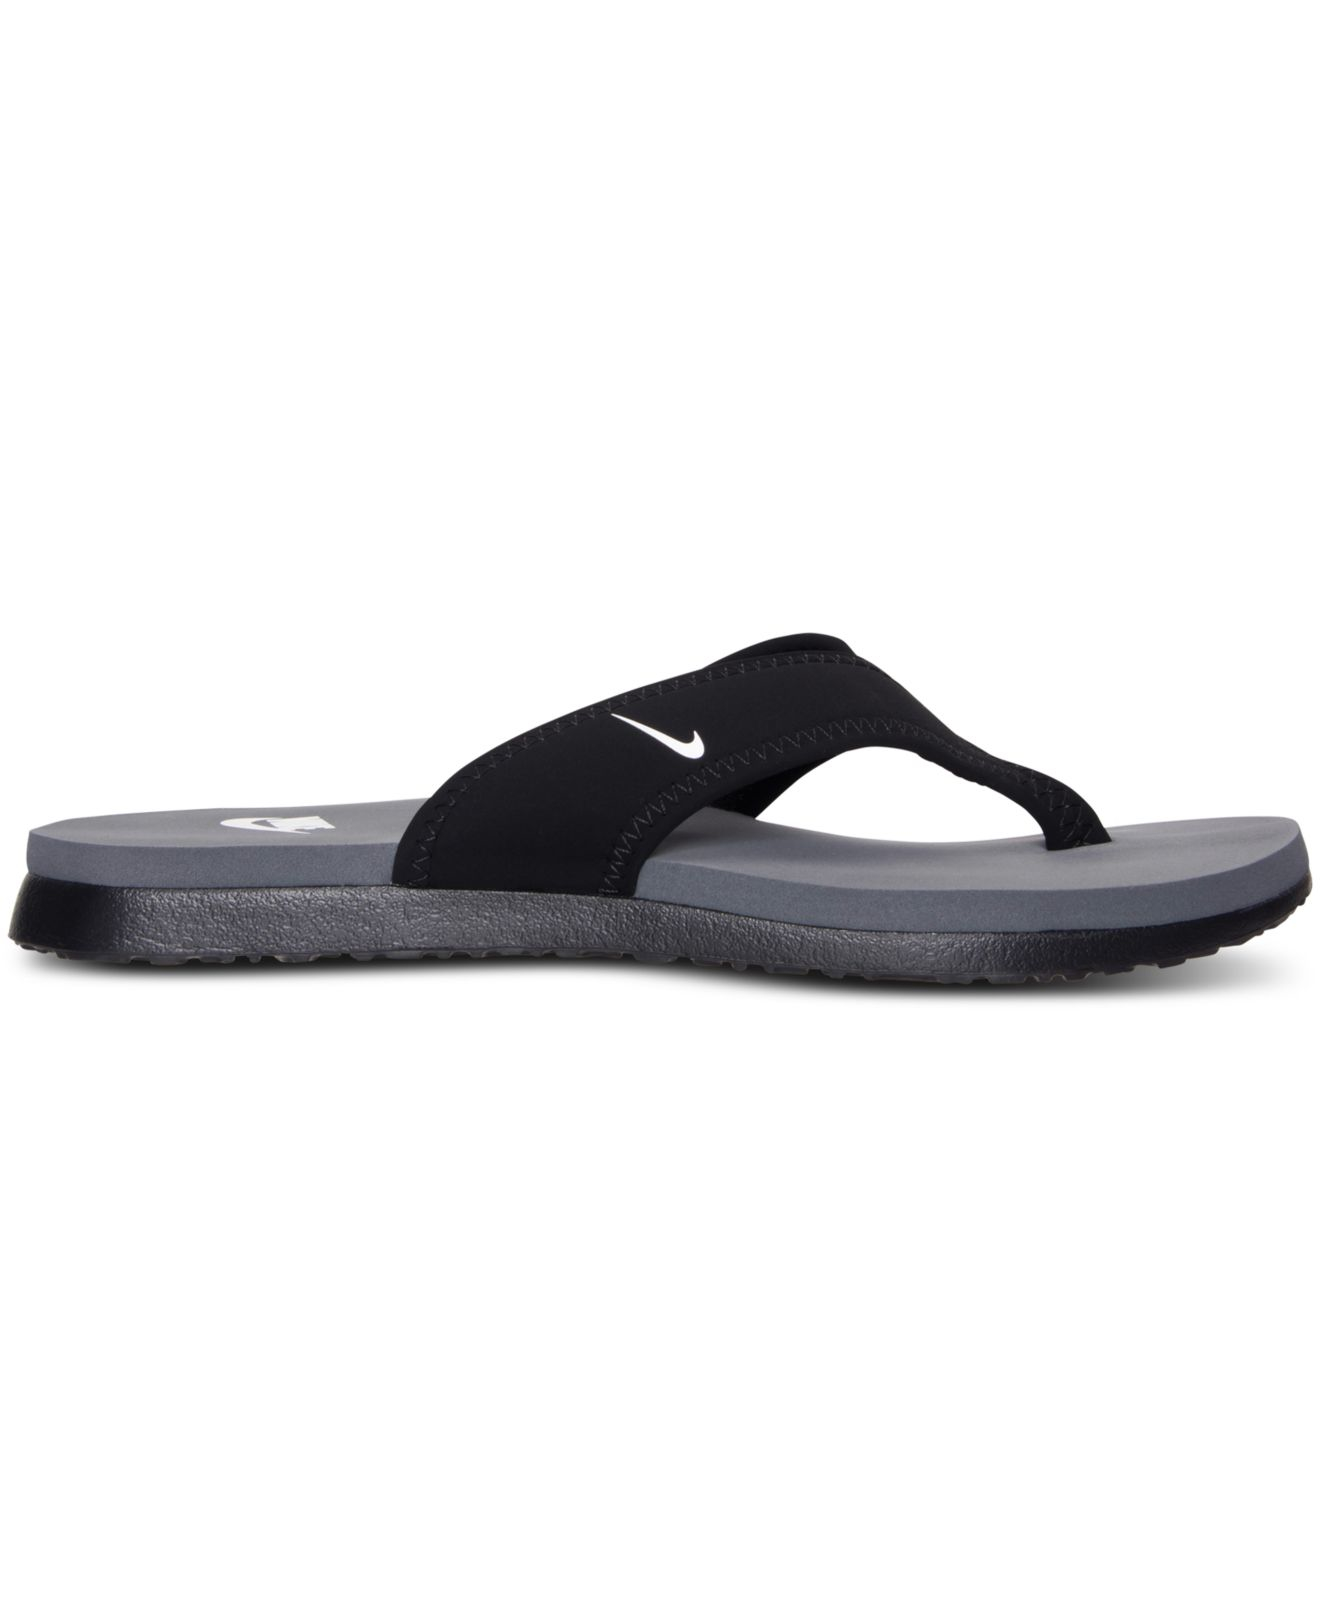 Lyst - Nike Men's Celso Plus Thong Sandals From Finish Line in Black ...